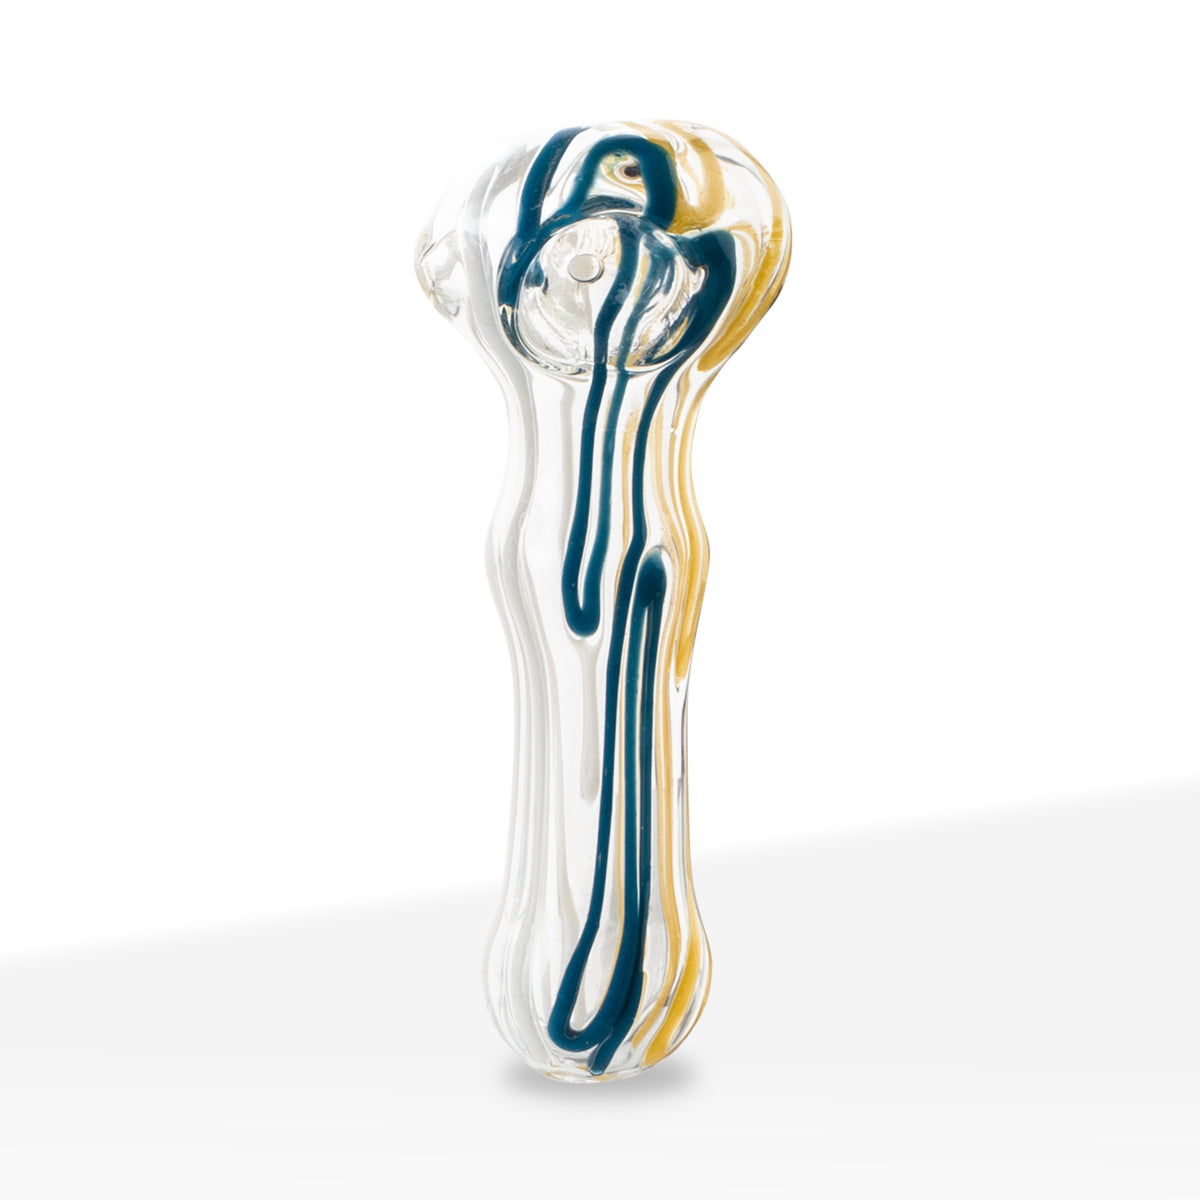 Hand Pipe | Classic Glass Spoon Candy Cane Color Swirl Hand Pipes | 5" - Glass - Assorted Colors - 10 Count